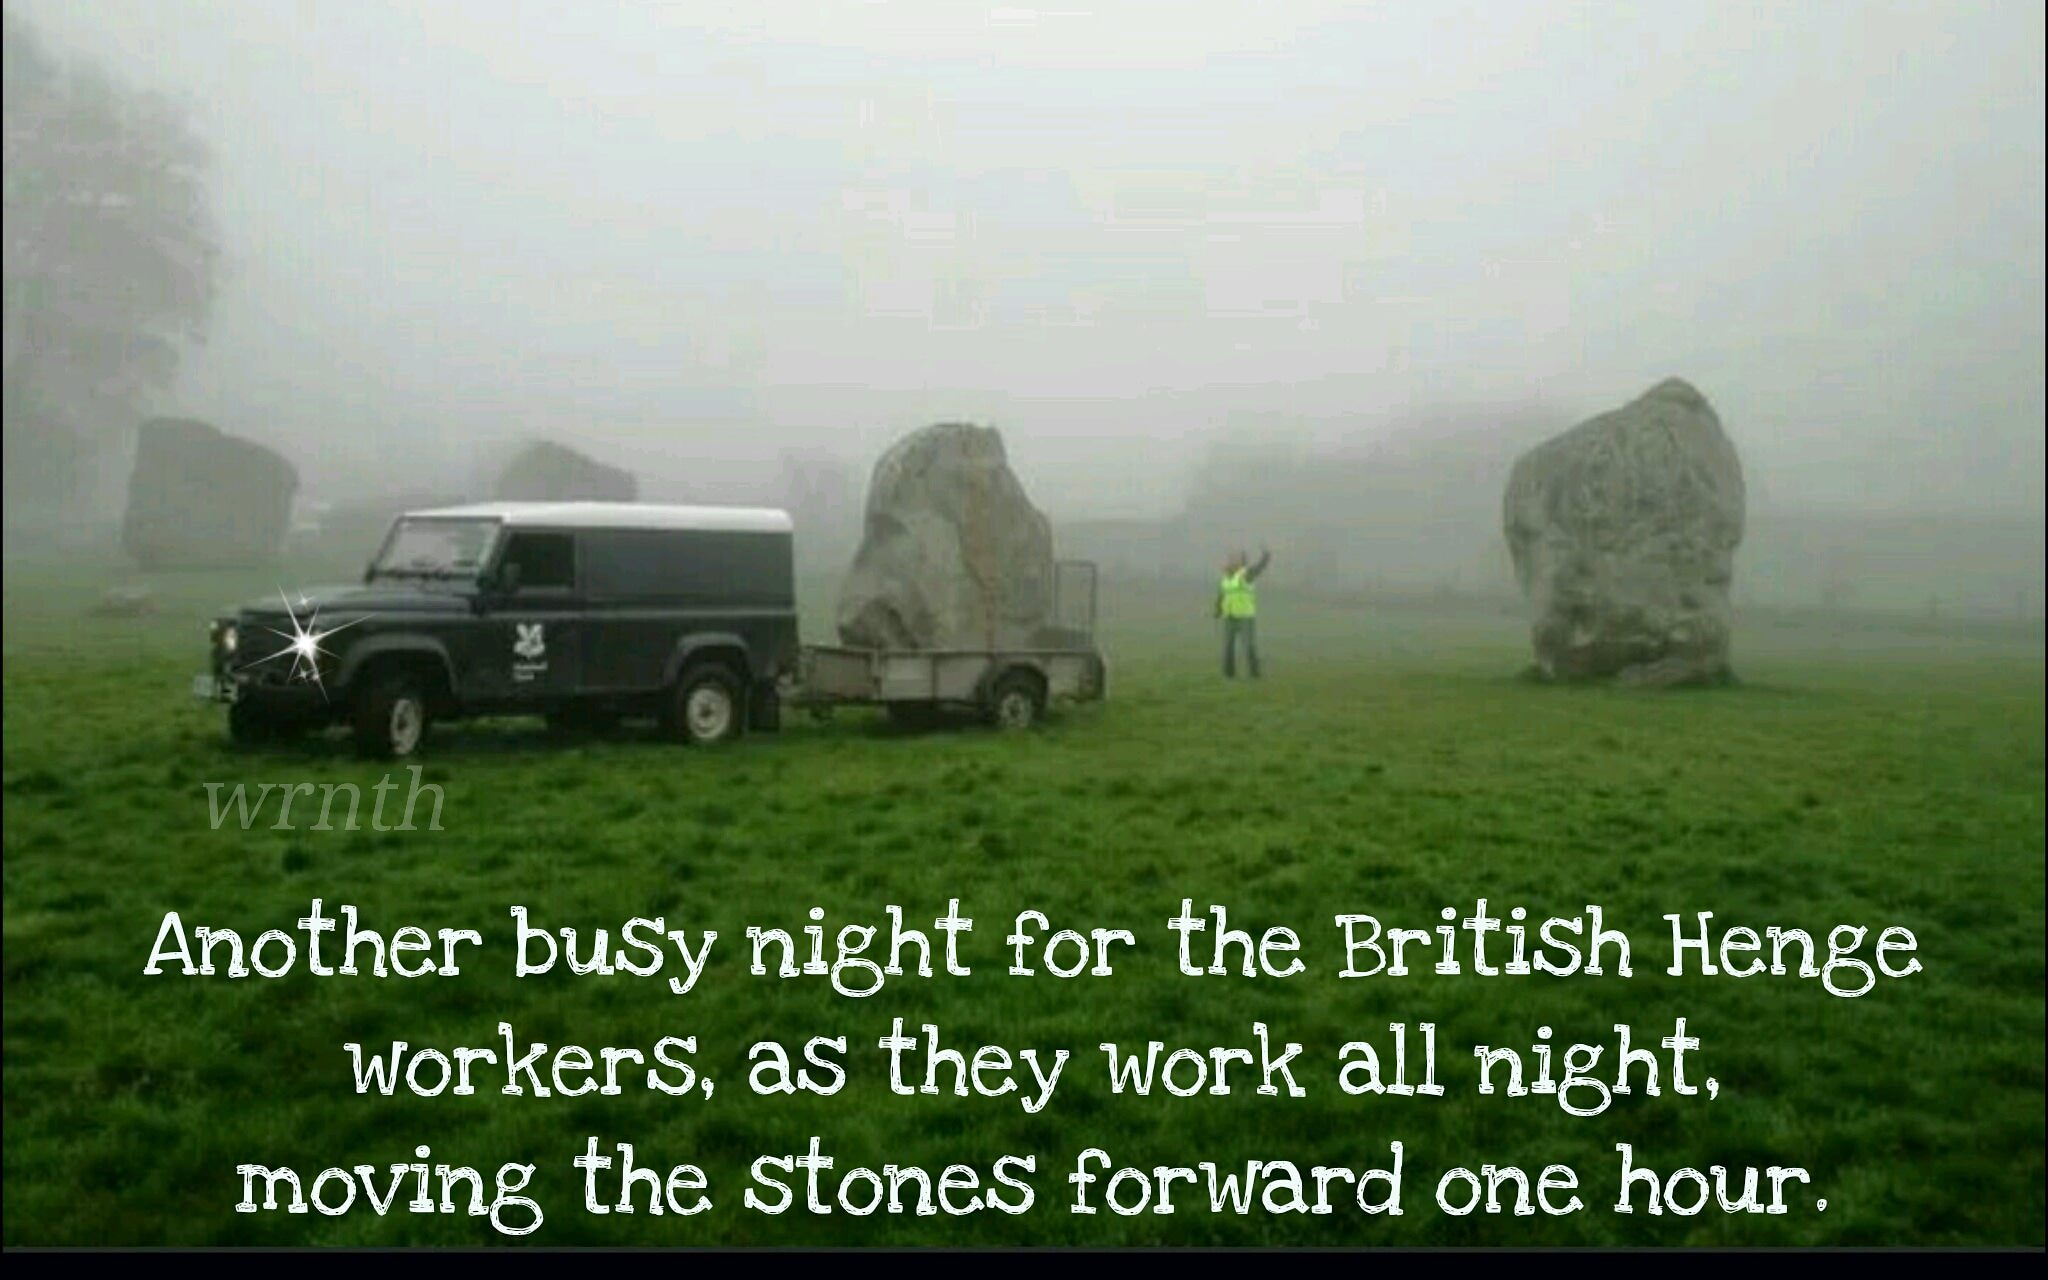 grass - wrnth Another busy night for the British Henge workers, as they work all night, moving the stones forward one hour